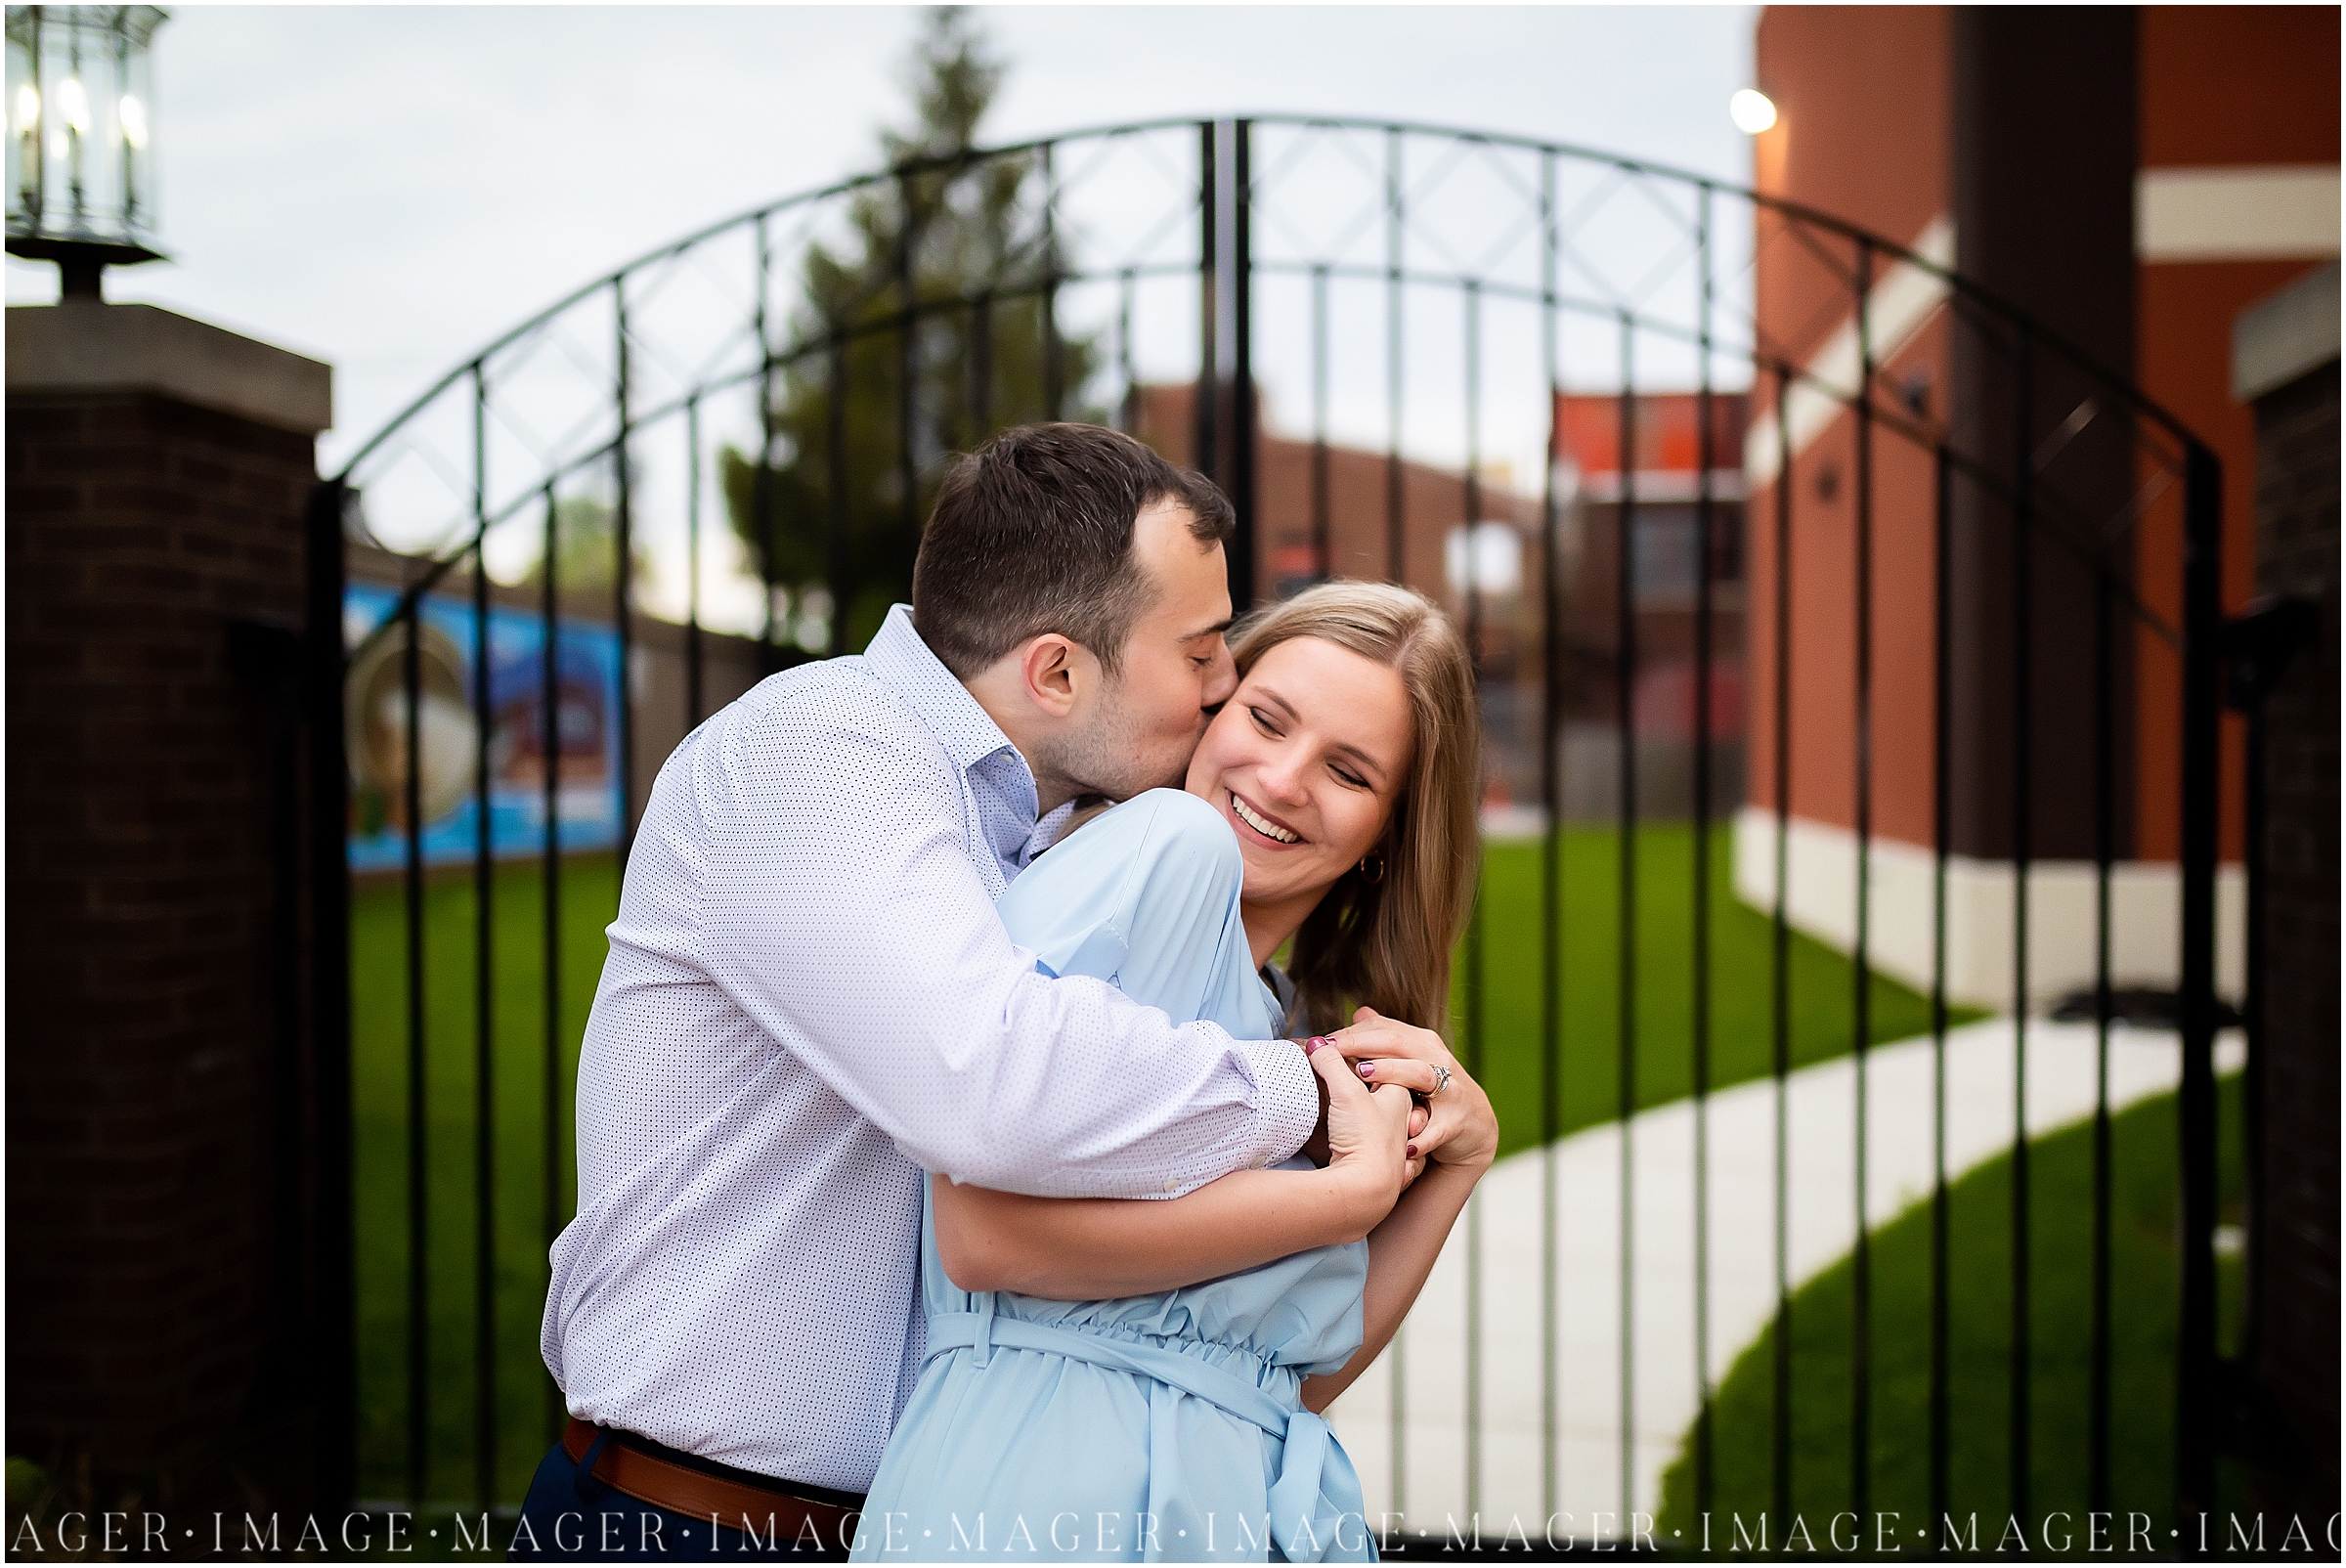 A man embraces his soon to be bride from behind while kissing her on the cheek at their downtown Danville, IL engagement session.

Photo taken by Mager Image Photography 